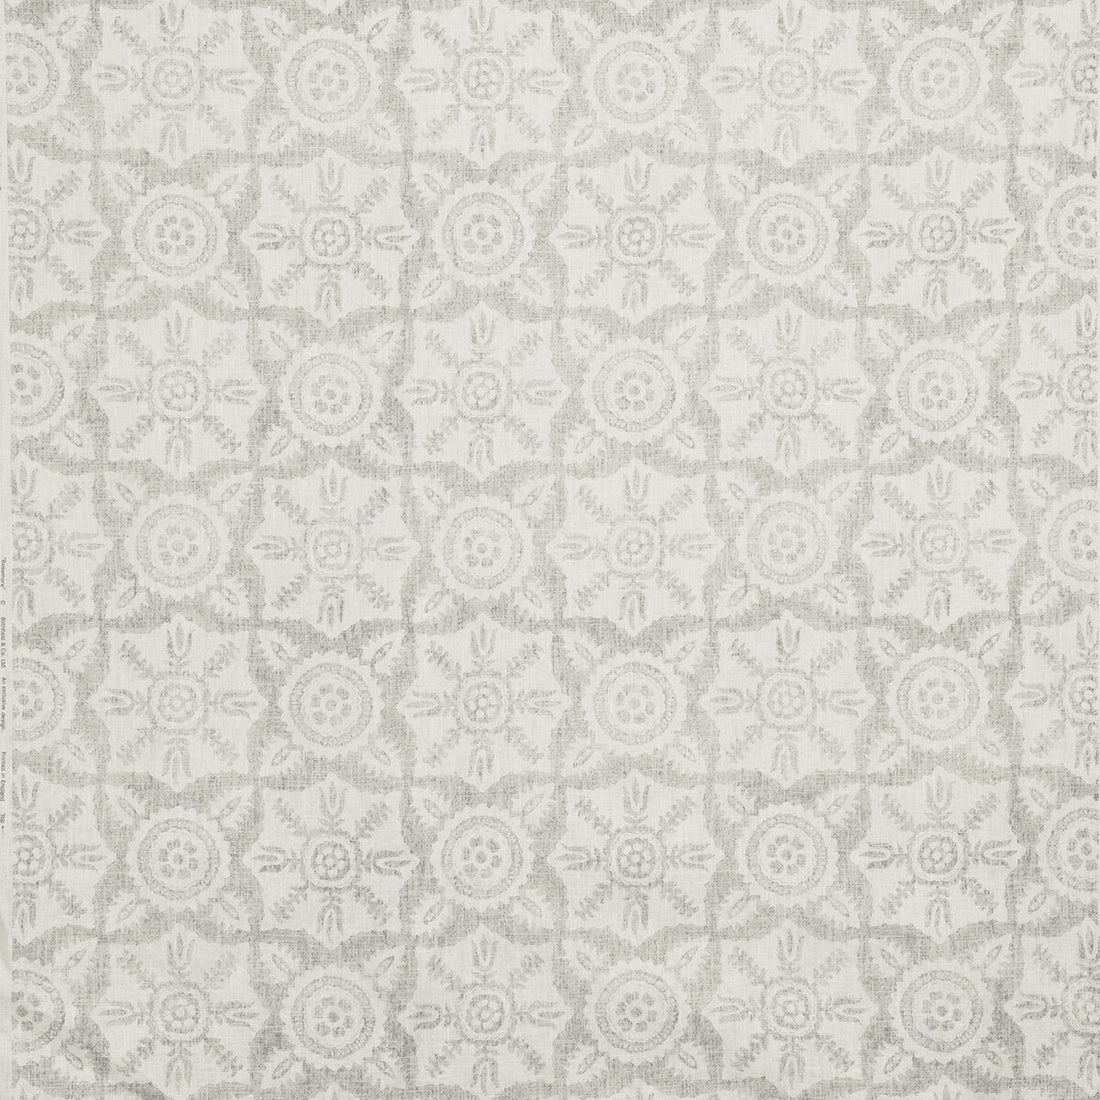 Rossmore II fabric in grey color - pattern BFC-3647.11.0 - by Lee Jofa in the Blithfield collection